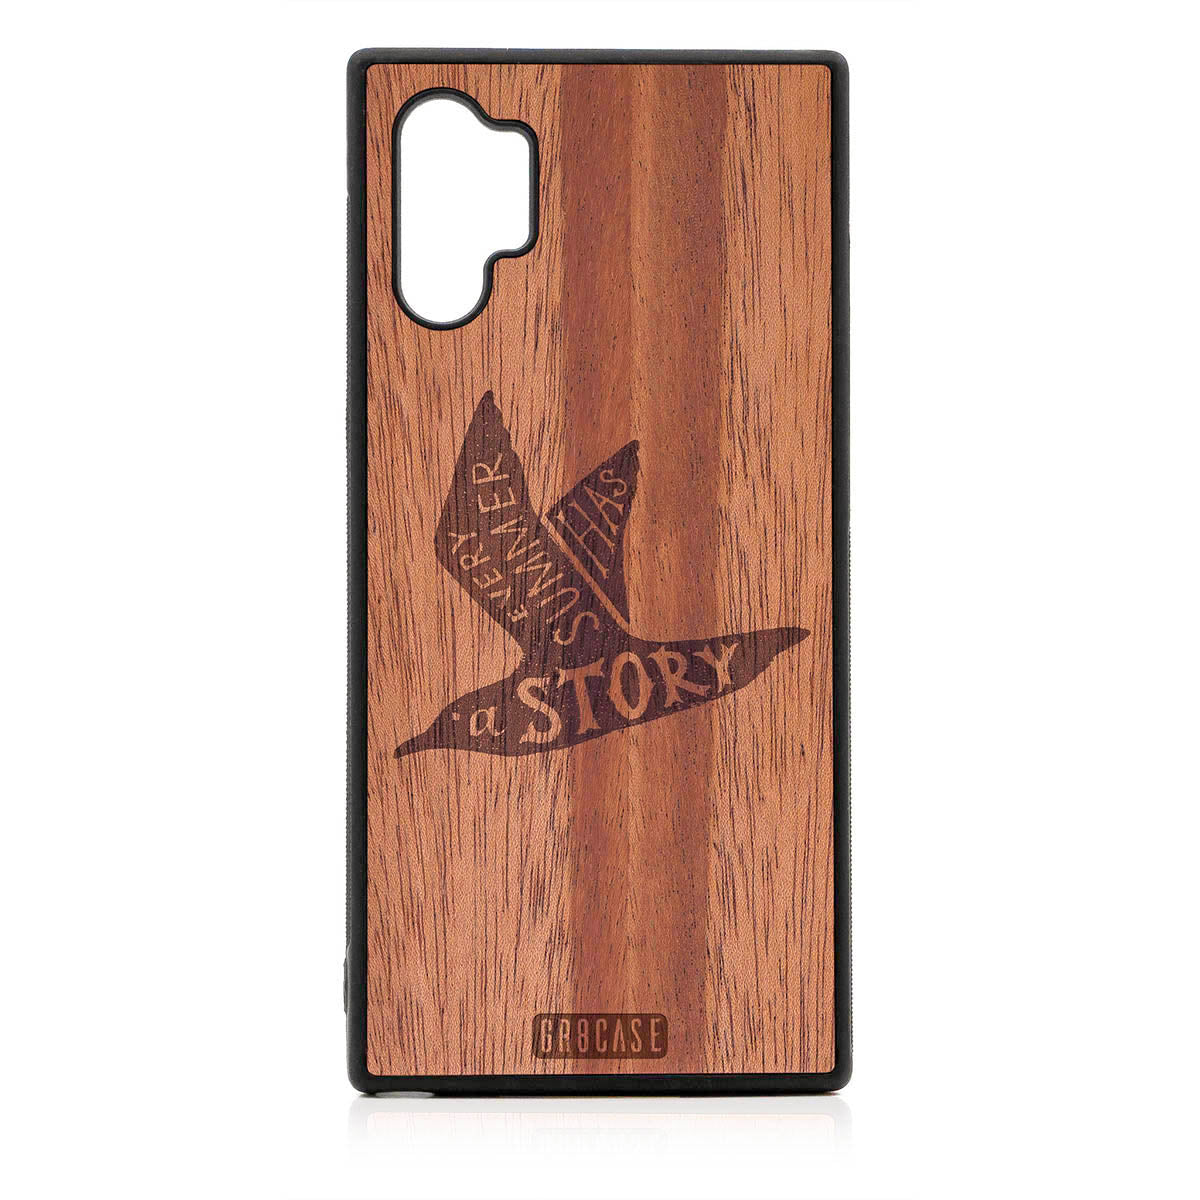 Every Summer Has A Story (Seagull) Design Wood Case For Samsung Galaxy Note 10 Plus